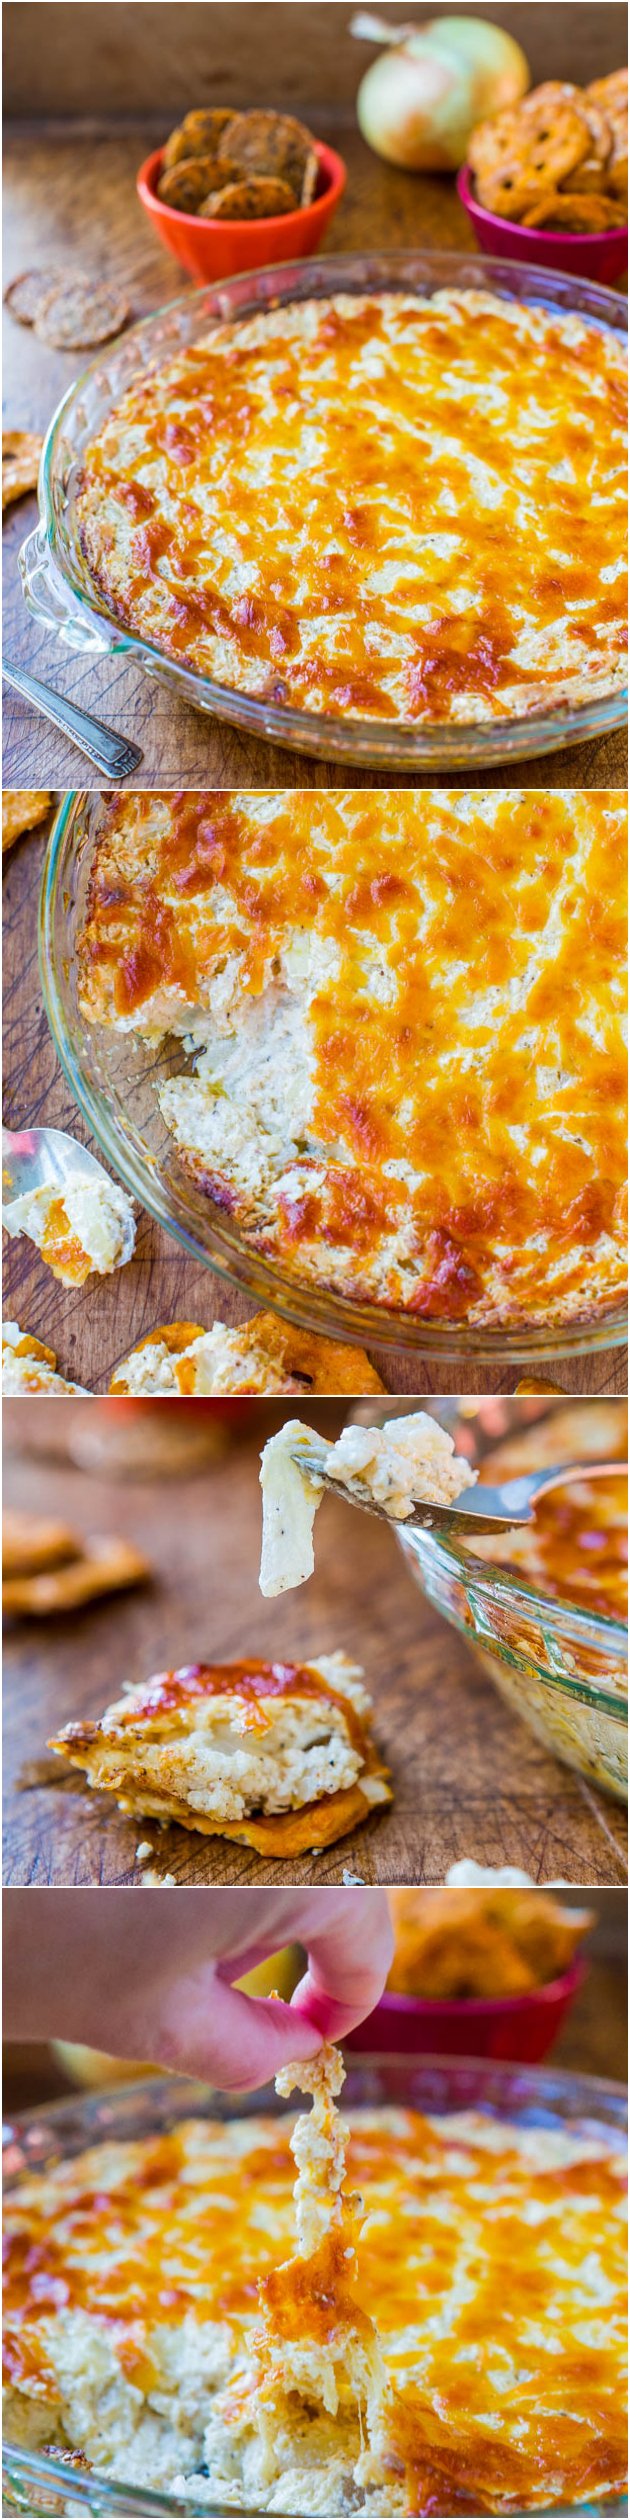 Creamy Baked Onion Dip — A cheesy, comforting, and easy dip that everyone loves! Made with cream cheese and sweet Vidalia onions!